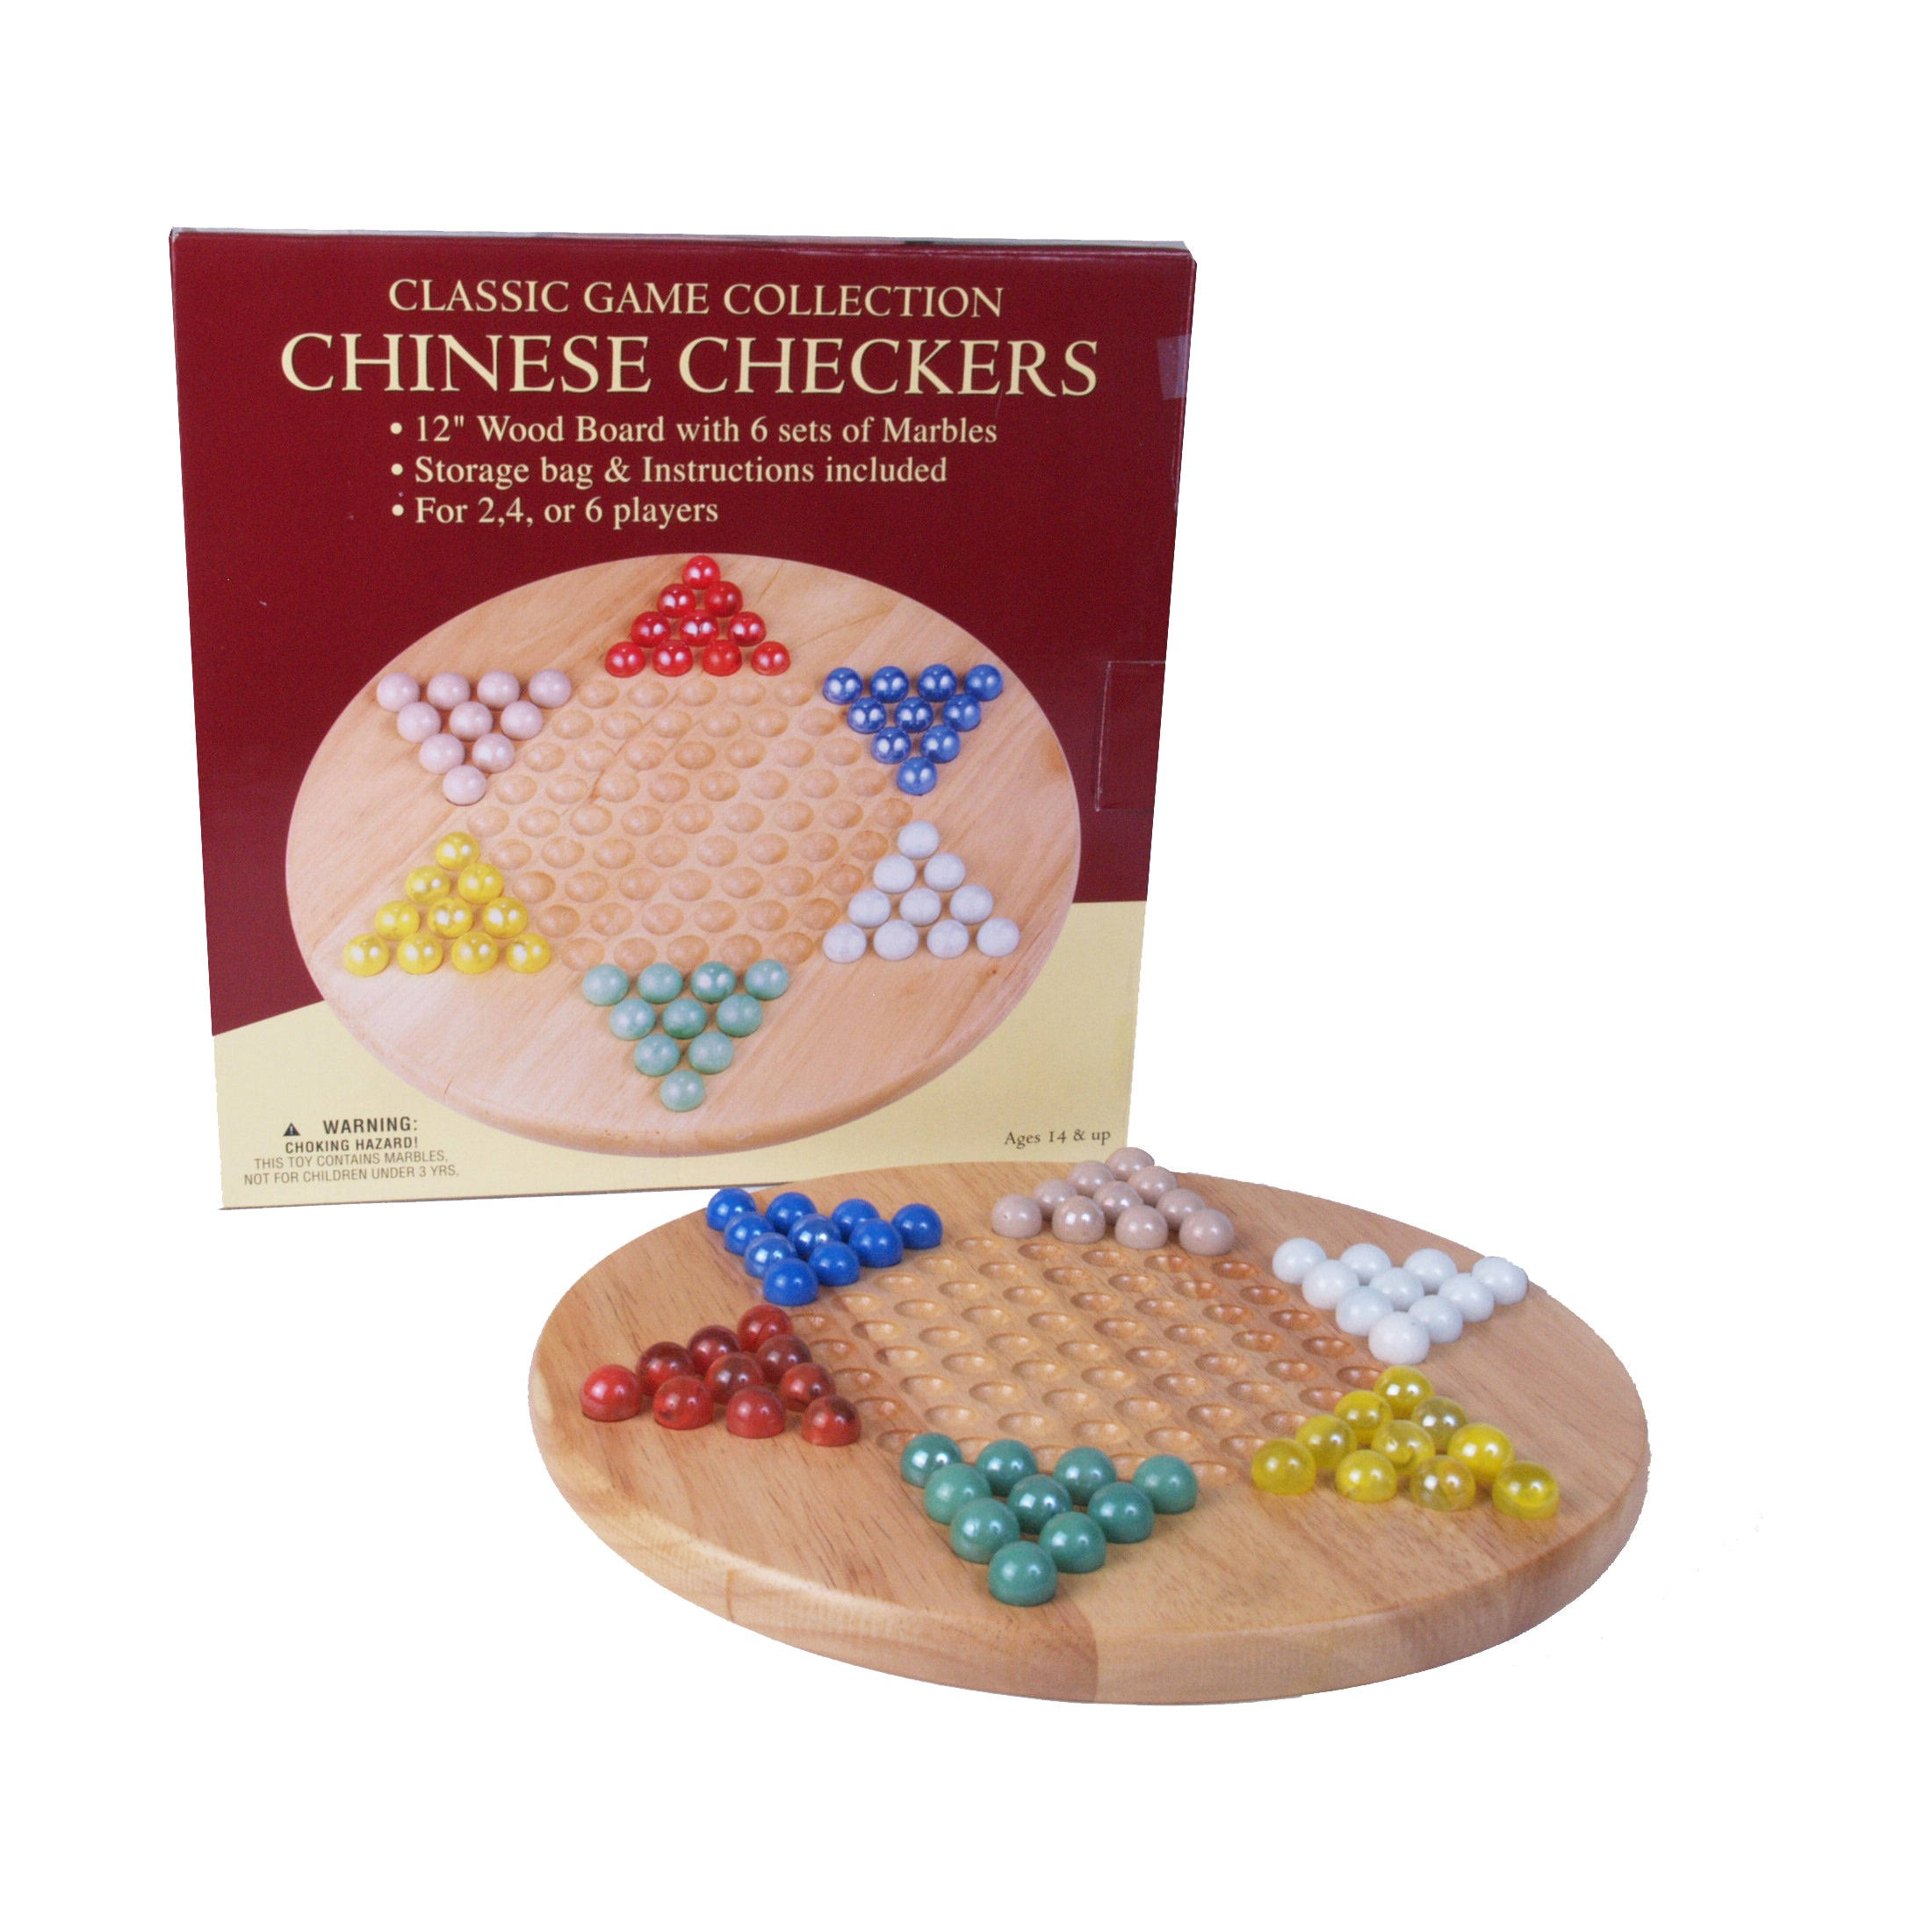 Classic Game Collection Chinese Checkers with Marbles